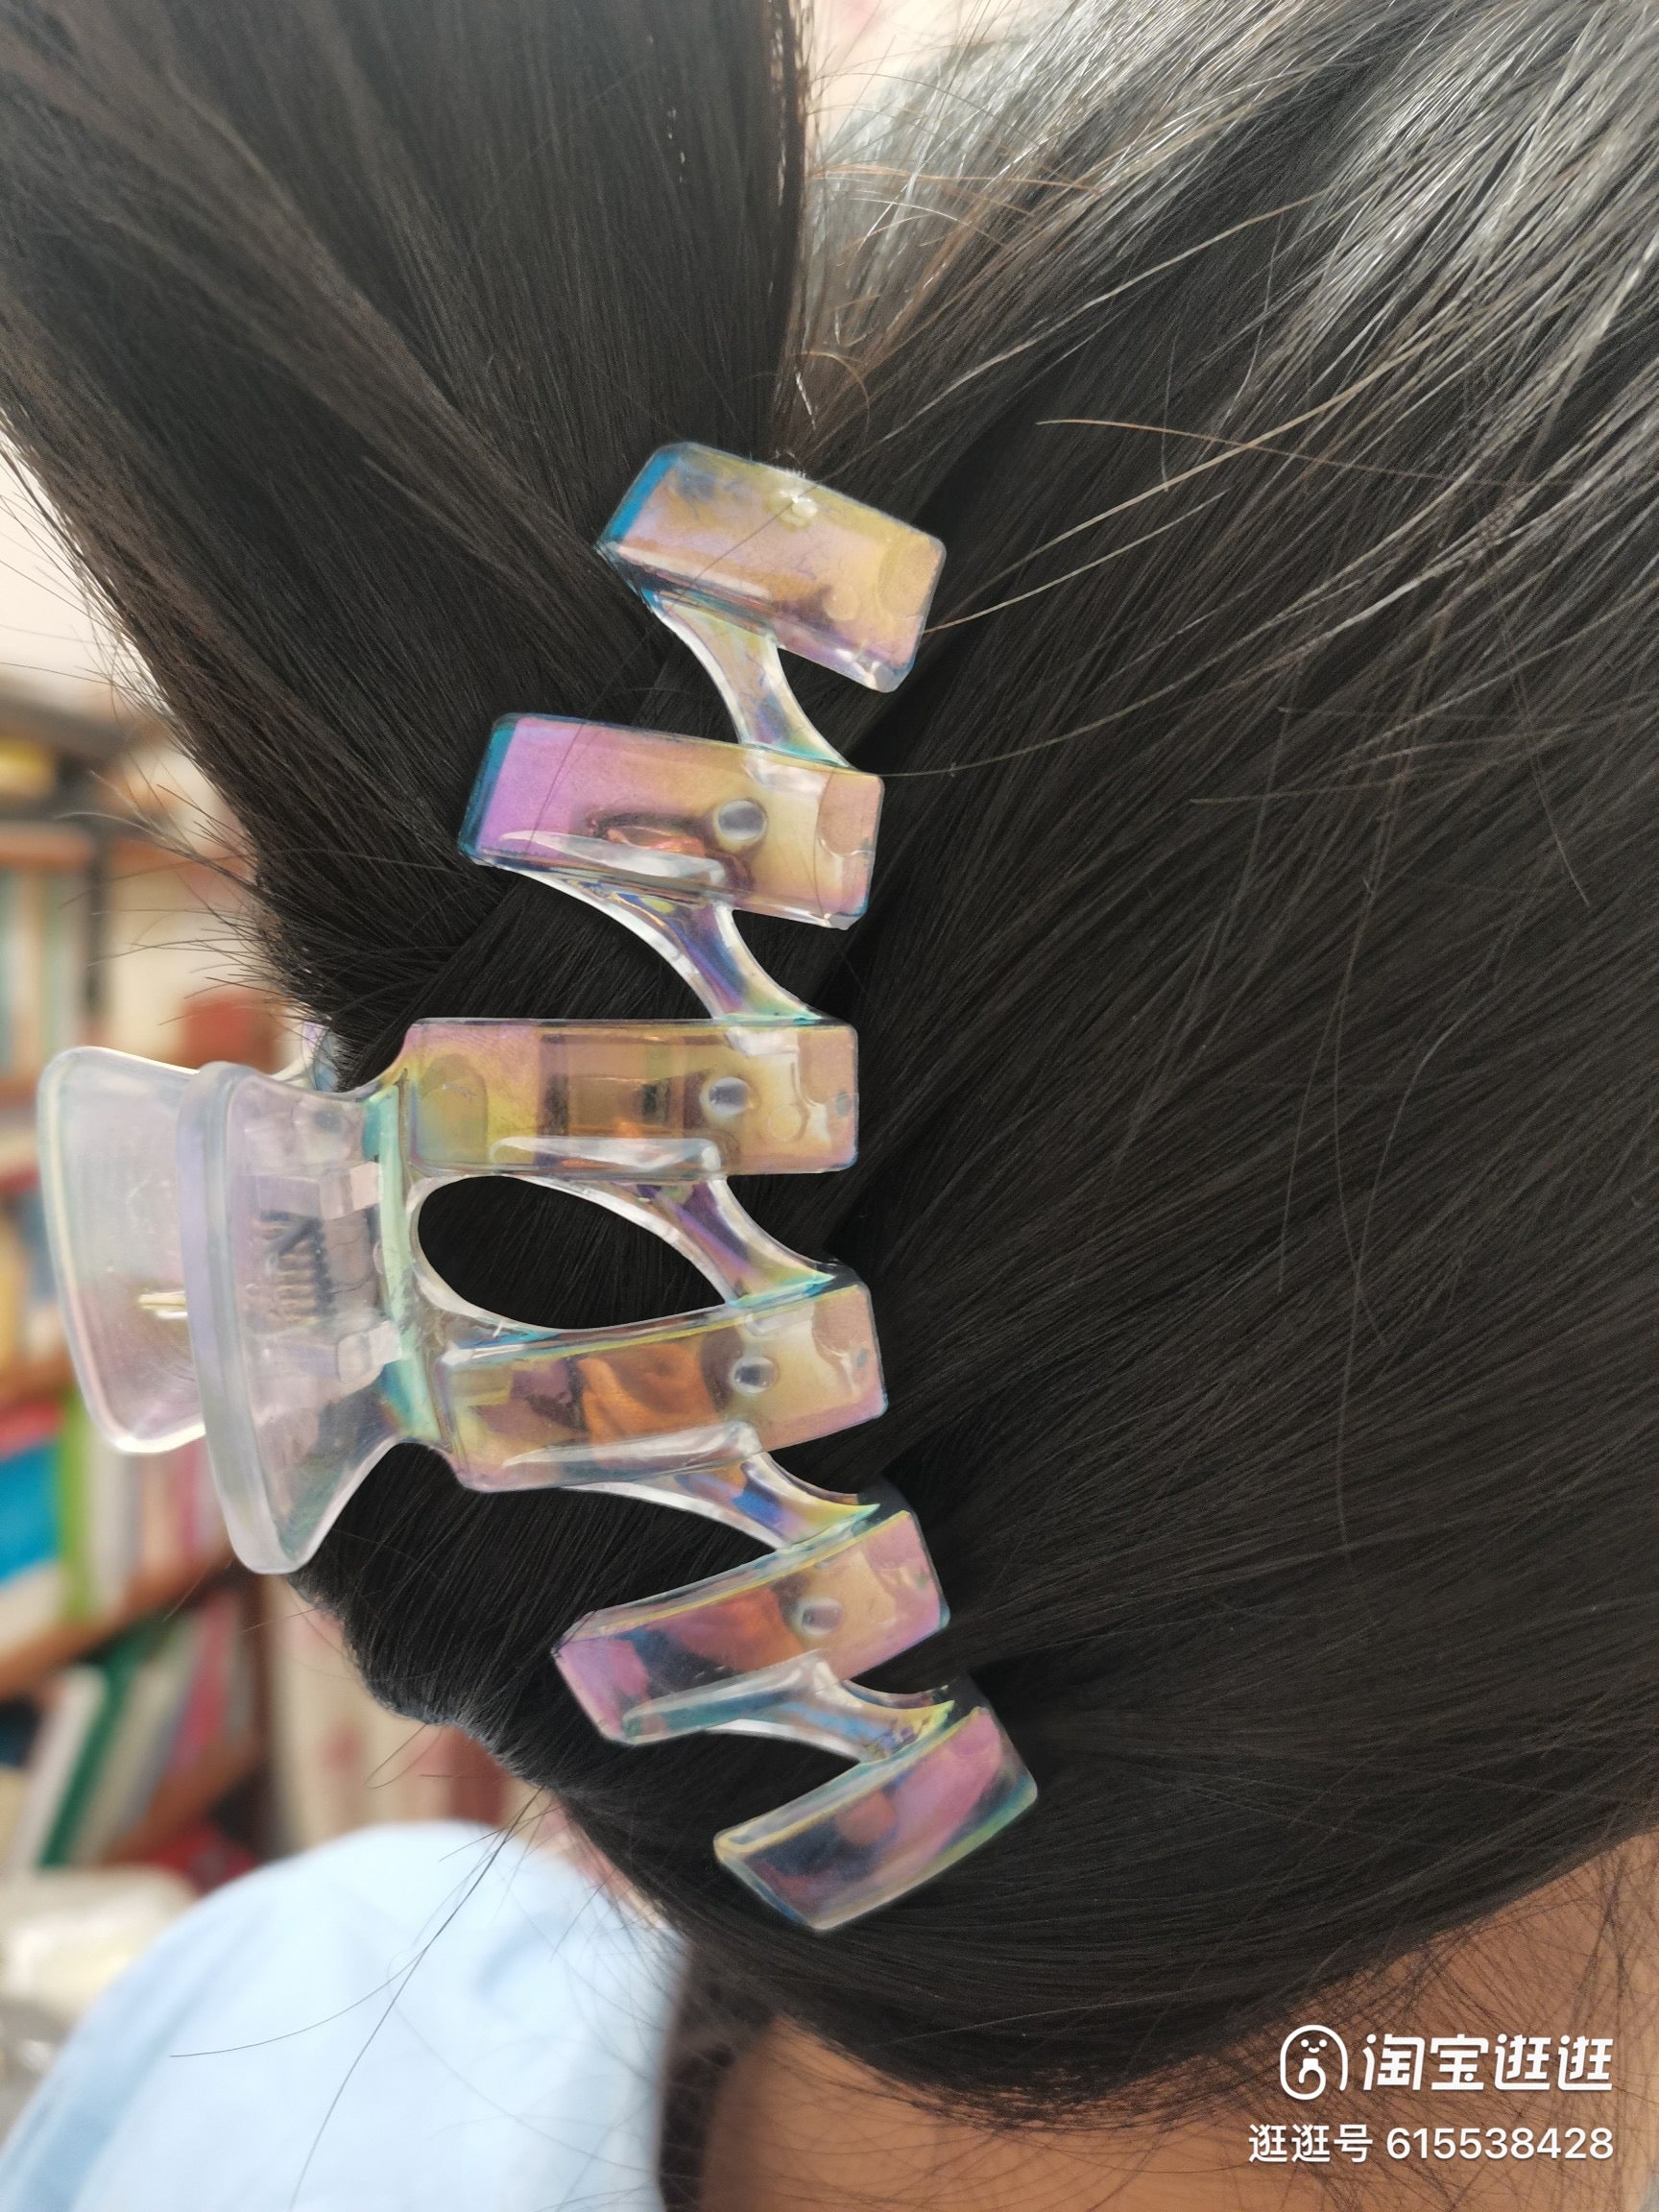 Mermaid Holographic Hair Claw by Veronique